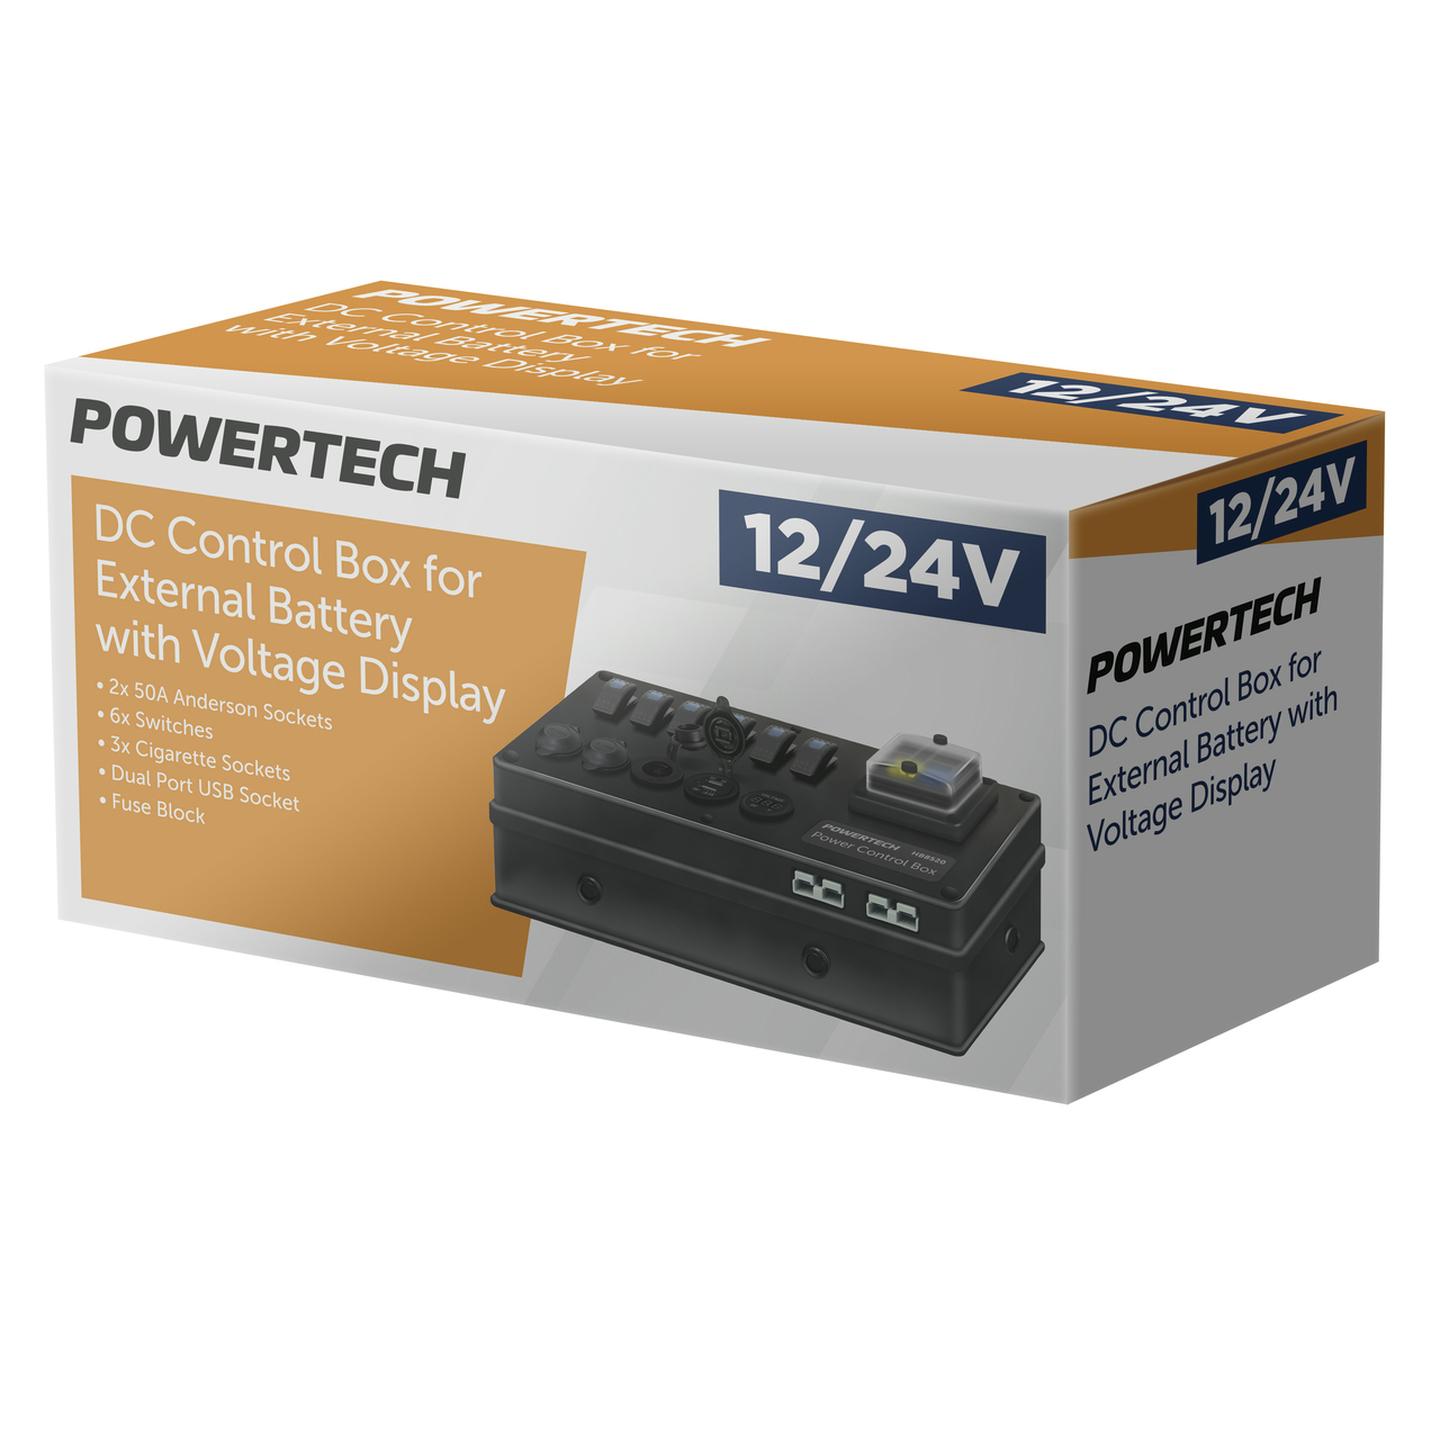 Powertech DC Control Box for External Battery with Voltage Display